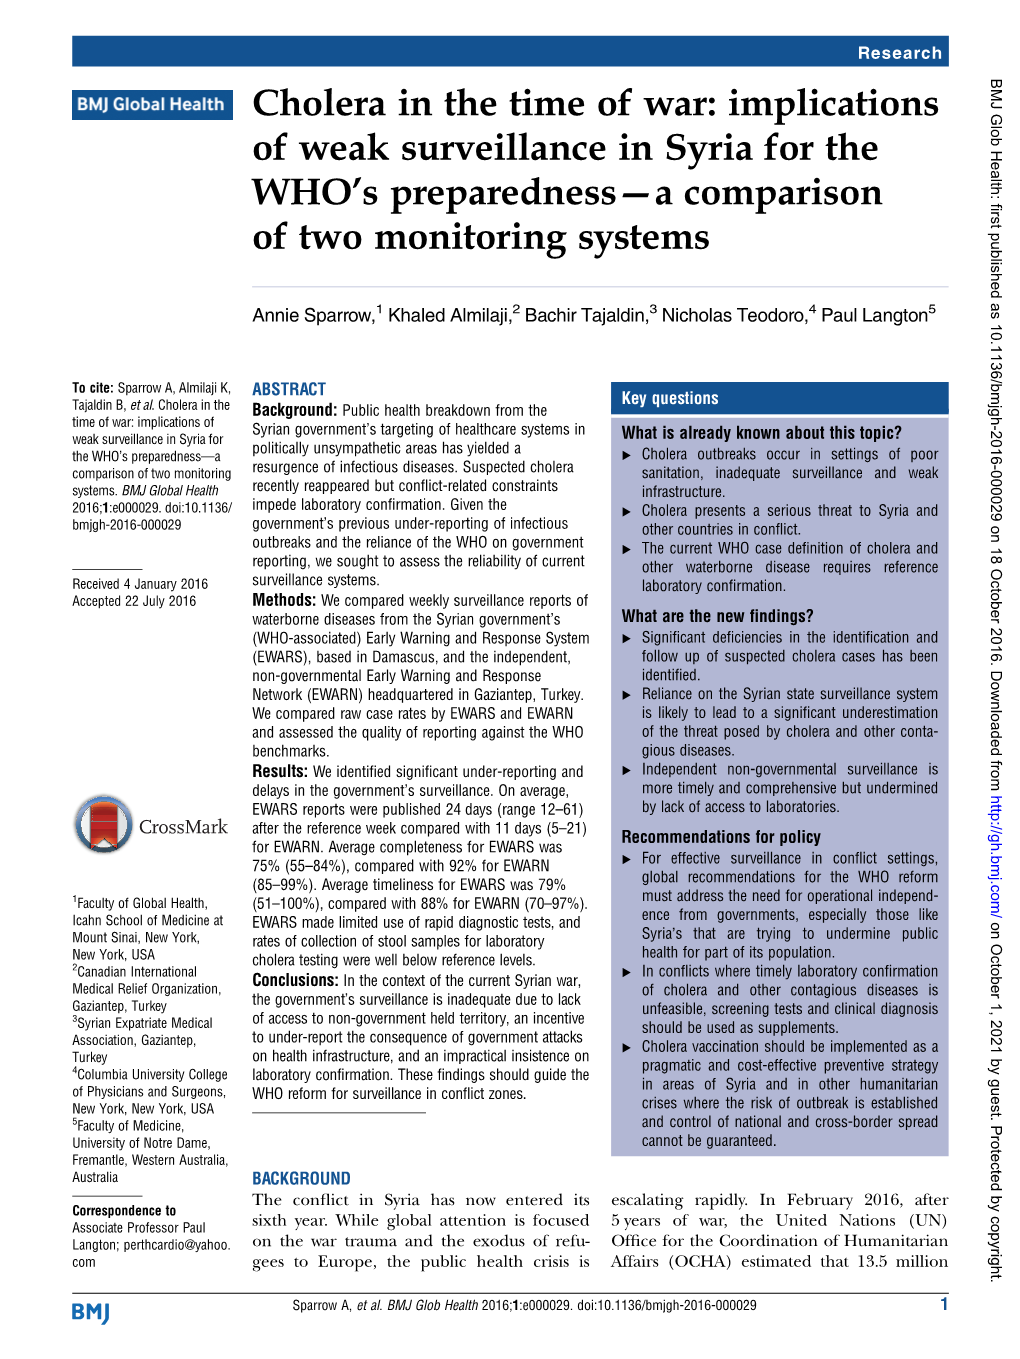 Cholera in the Time of War: Implications of Weak Surveillance in Syria for the WHO’S Preparedness—A Comparison of Two Monitoring Systems